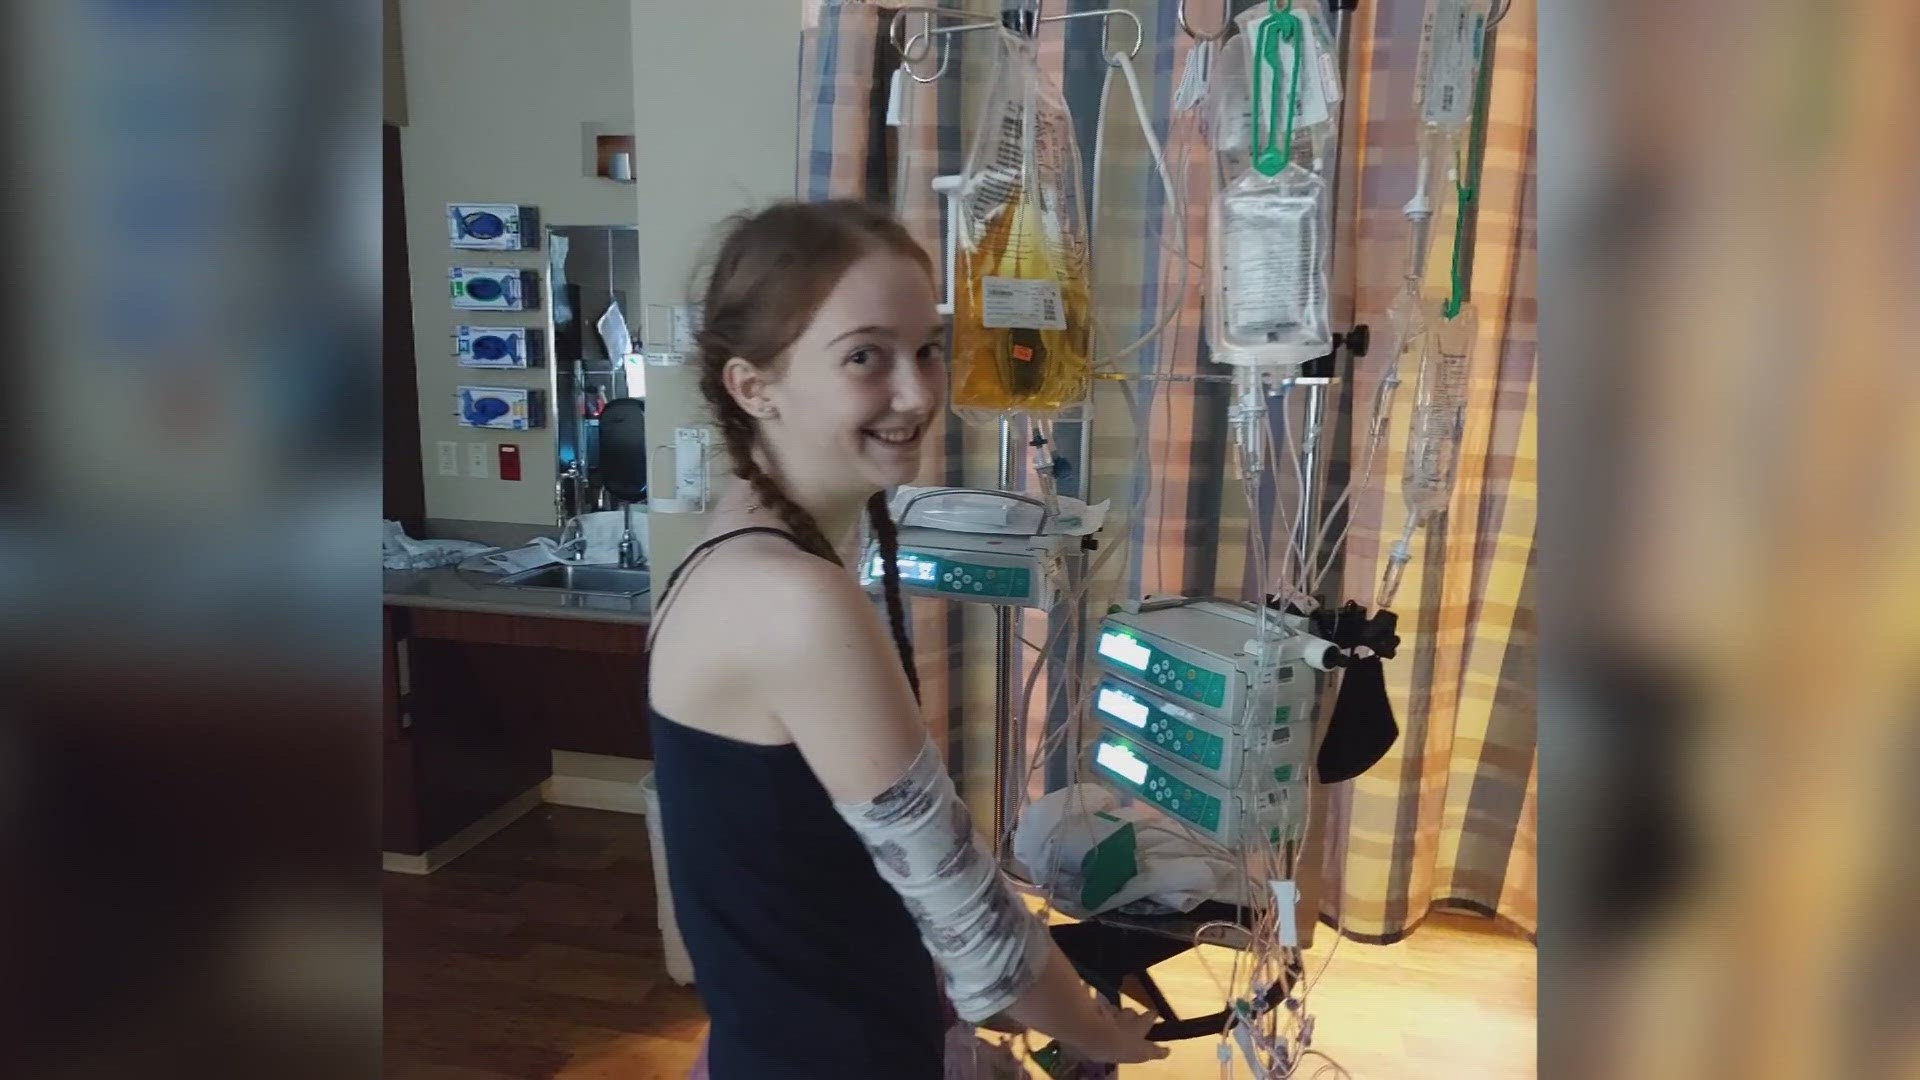 A GoFundMe has been created for Aubrey Knudtson, who is trying to raise money for much-needed medical care in Temple, Texas.